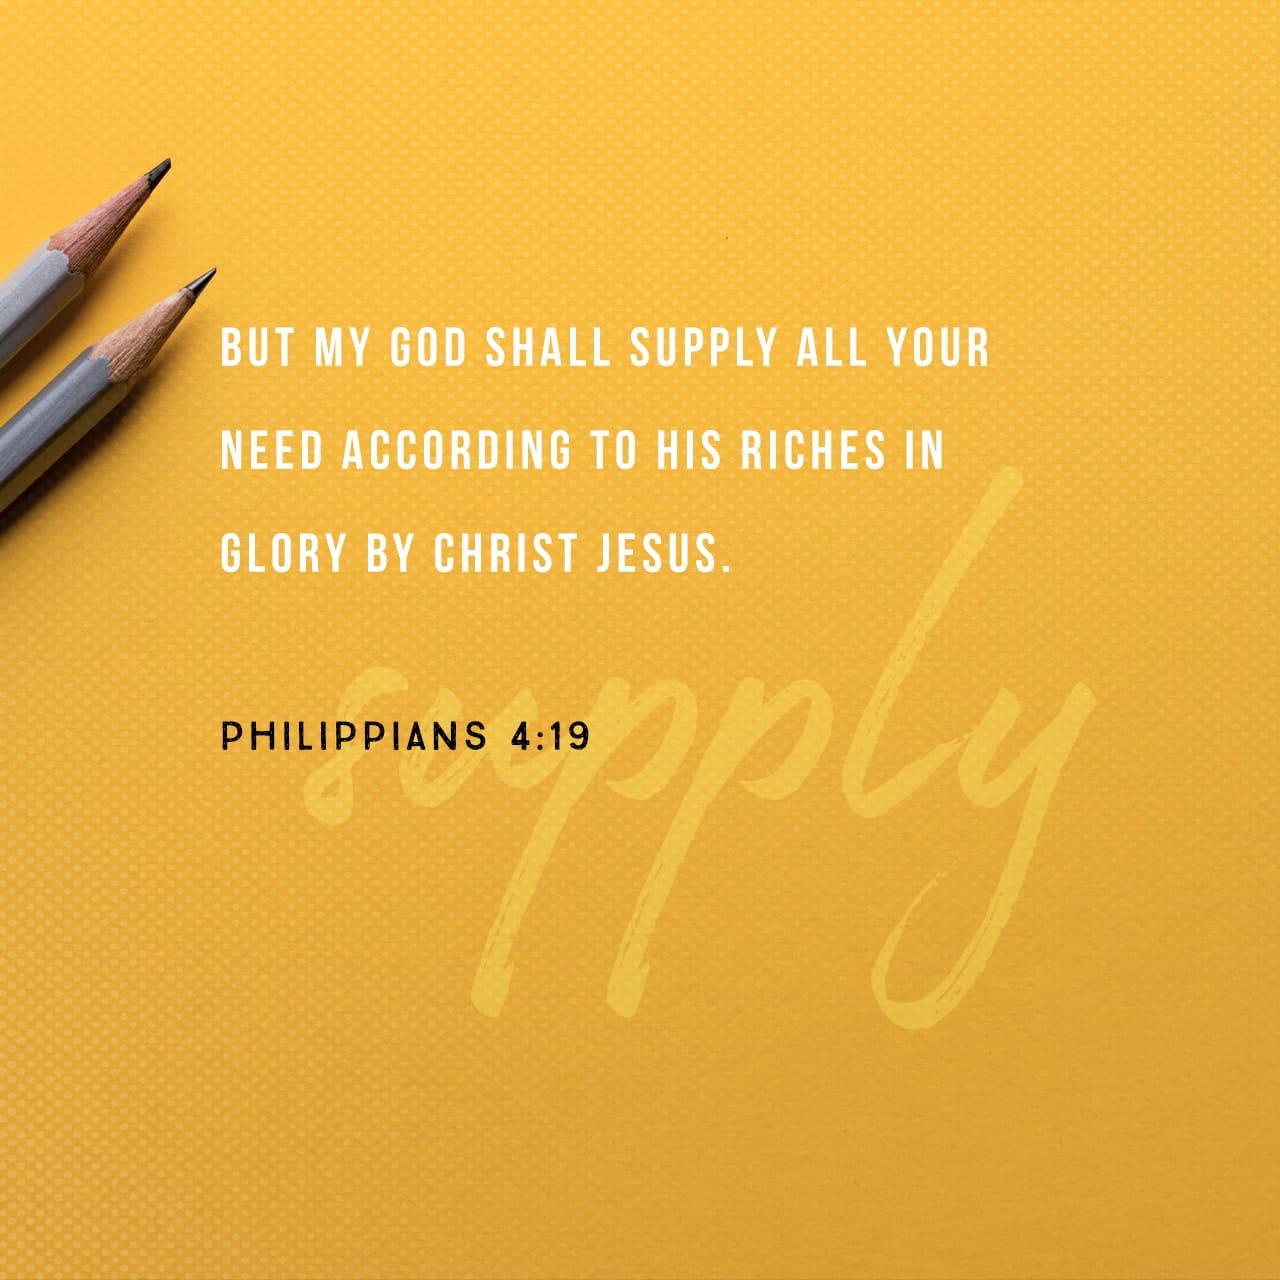 Bible Verse of the Day - day 87 - image 1634 (Philippians 4:19)